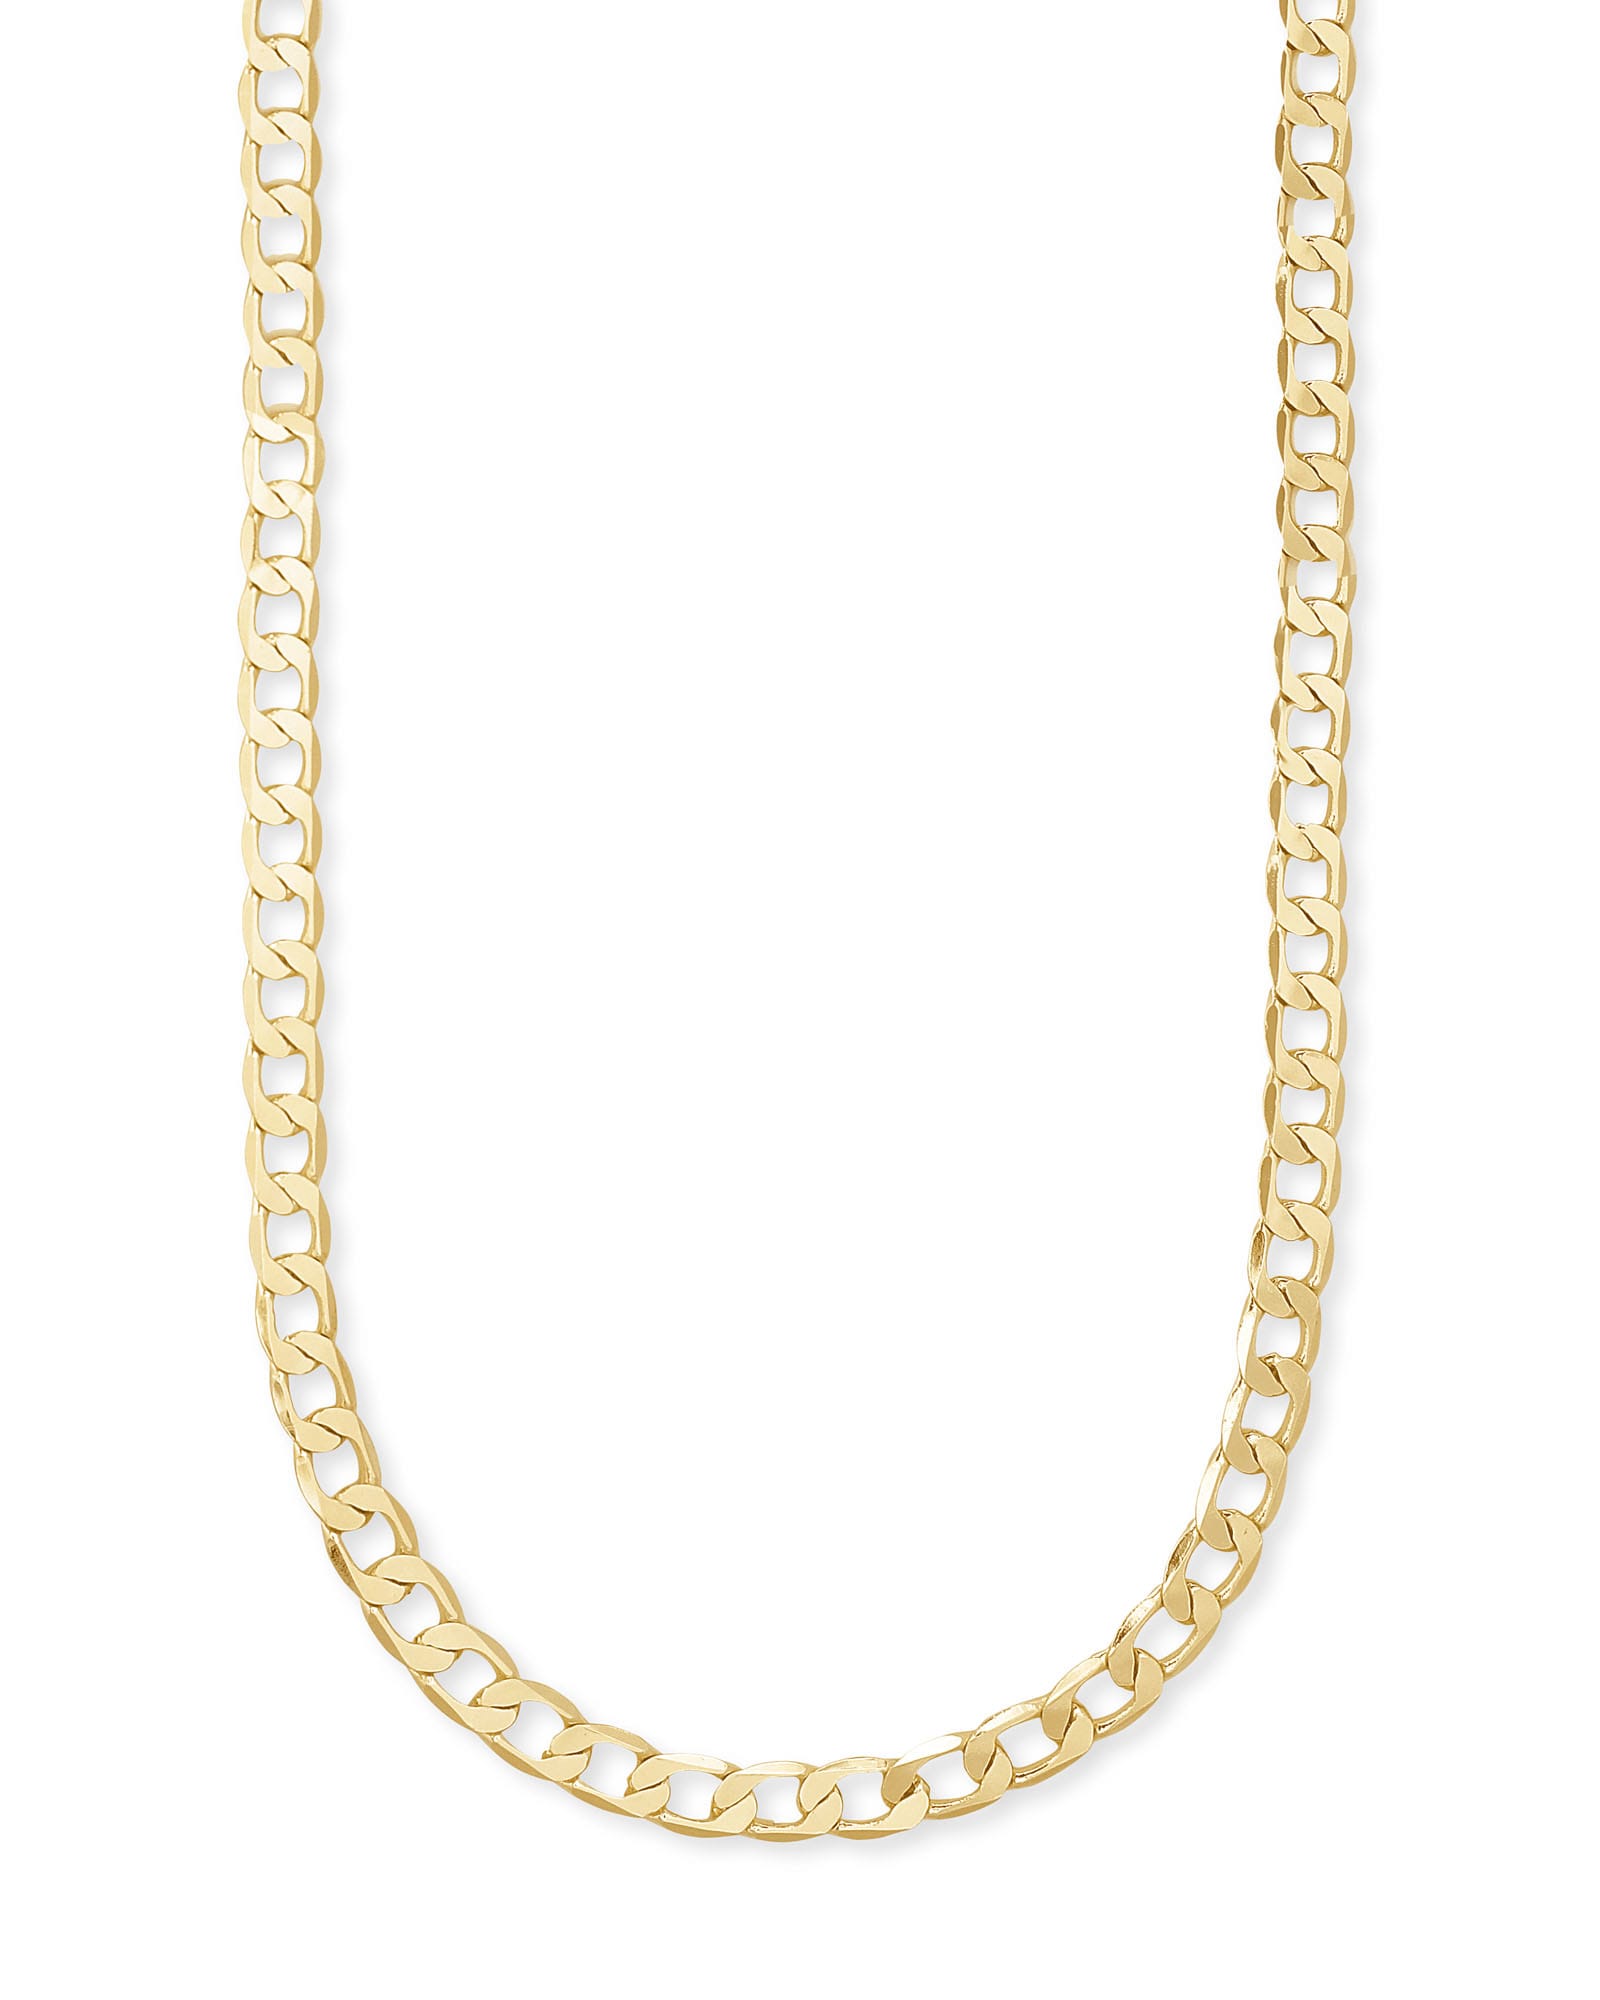 Ronnie Link Chain Necklace in Gold | Kendra Scott